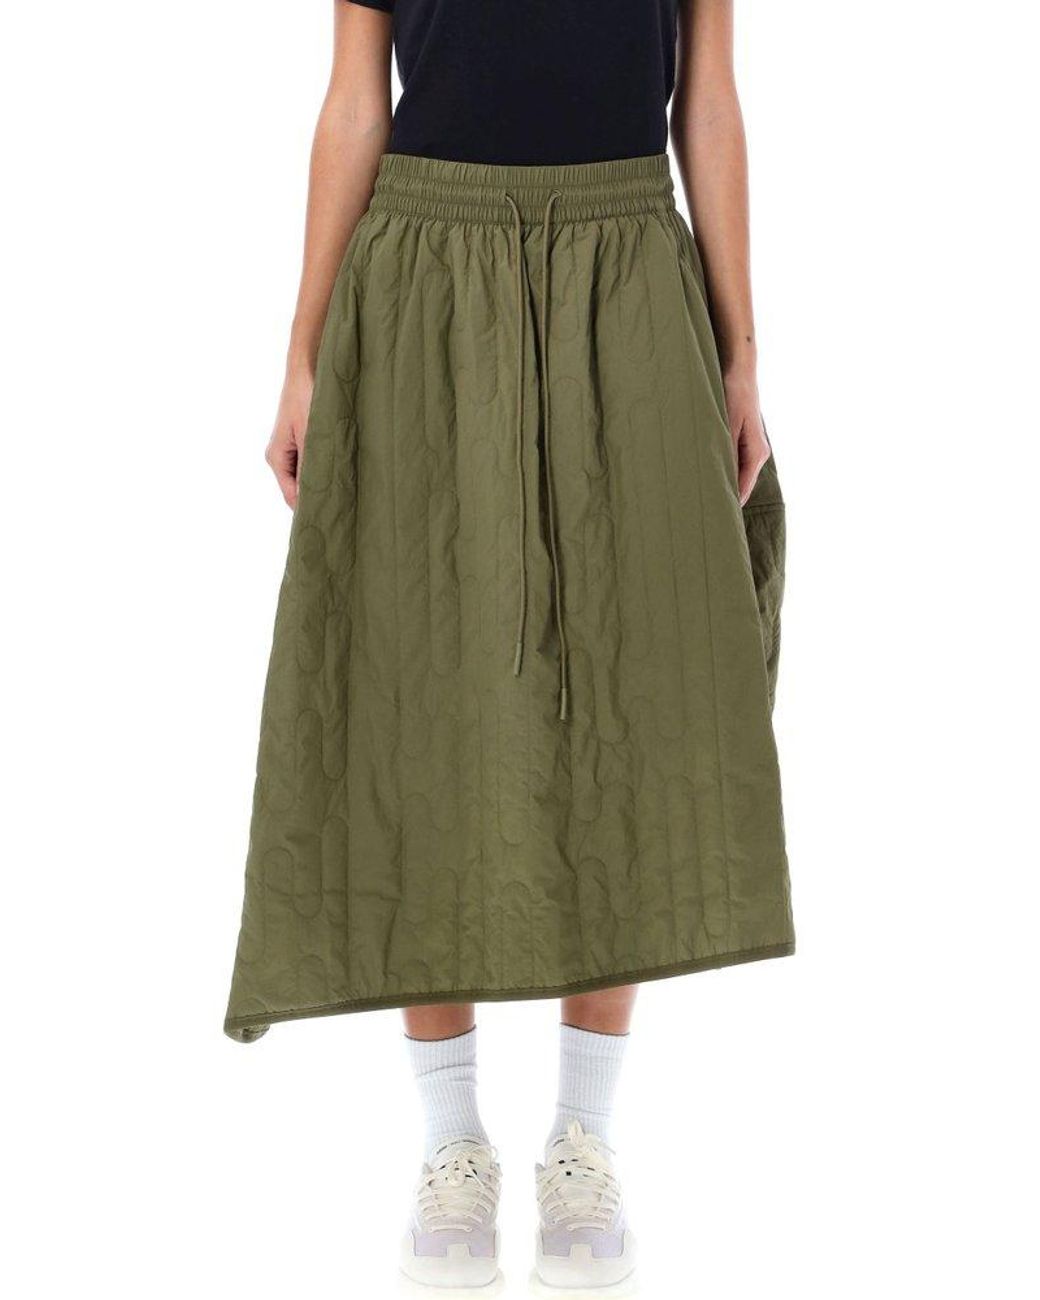 Y-3 Quilted Midi Skirt in Green | Lyst